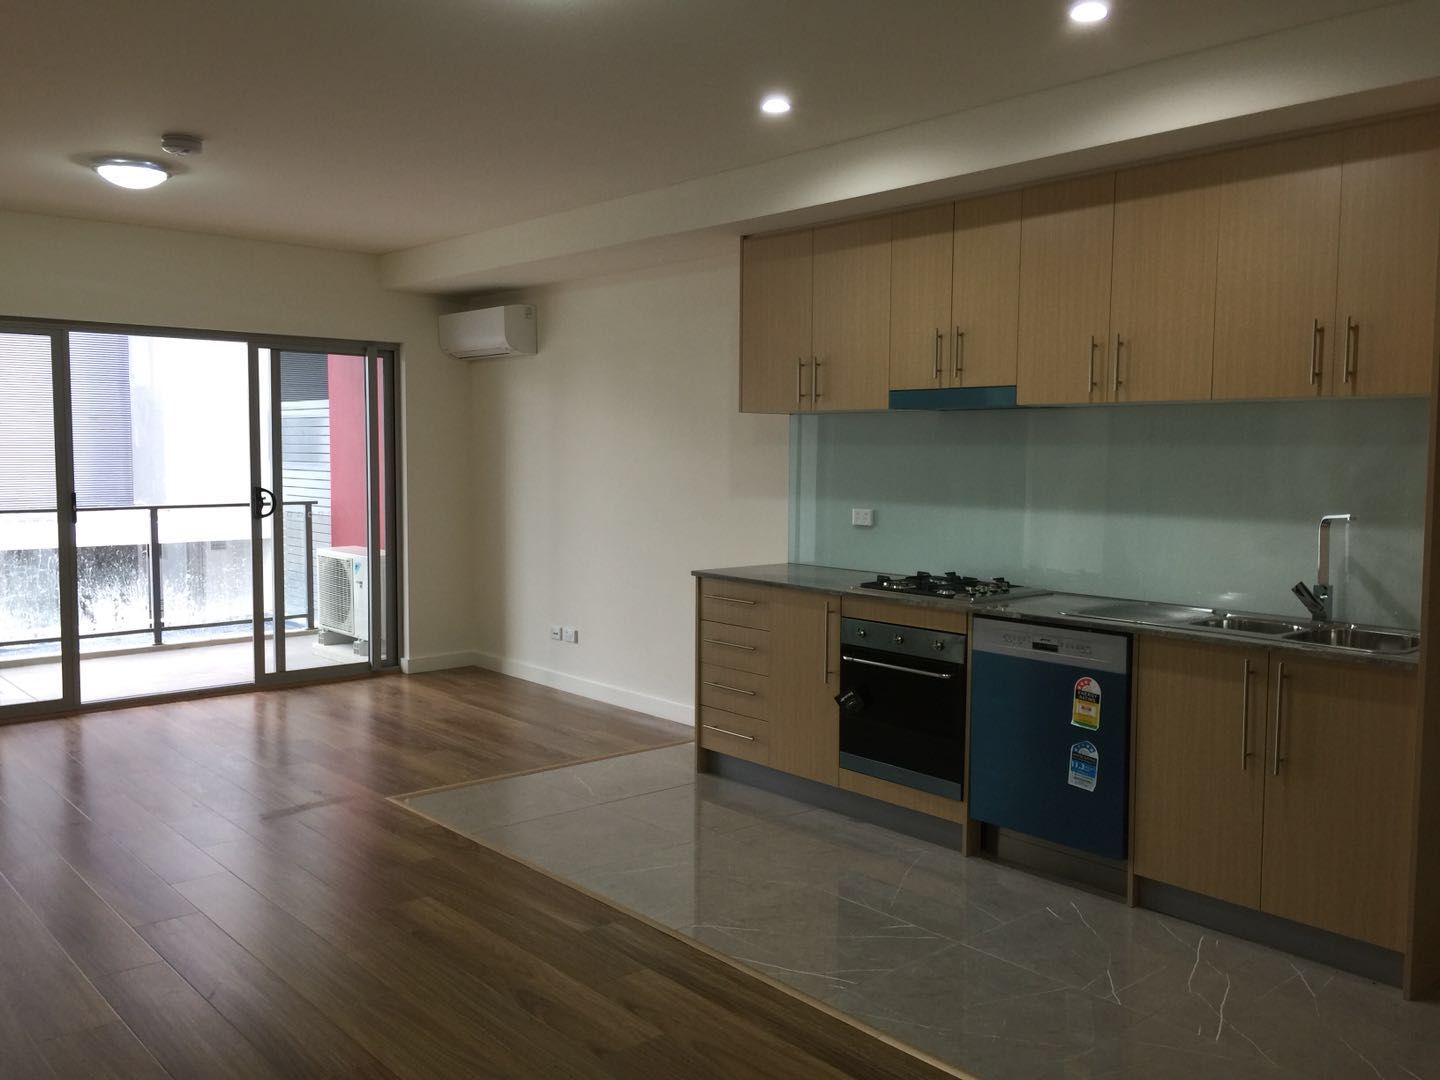 2 bedrooms Apartment / Unit / Flat in B407/40-50 Arncliffe St WOLLI CREEK NSW, 2205